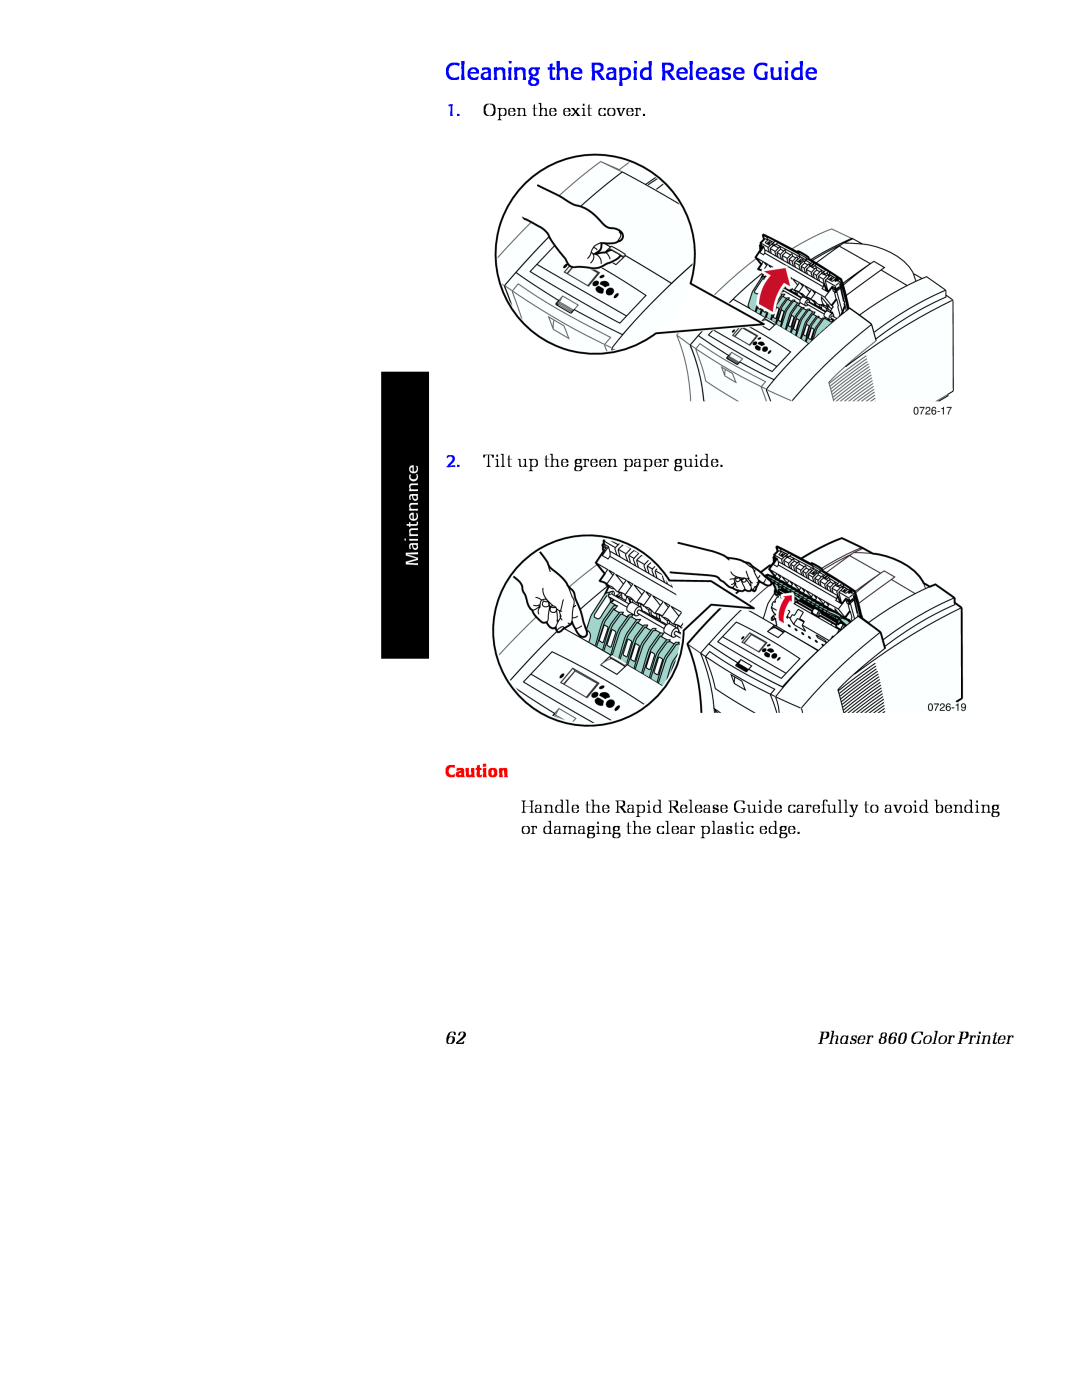 Xerox manual Cleaning the Rapid Release Guide, Maintenance, Phaser 860 Color Printer, 0726-17, 0726-19 